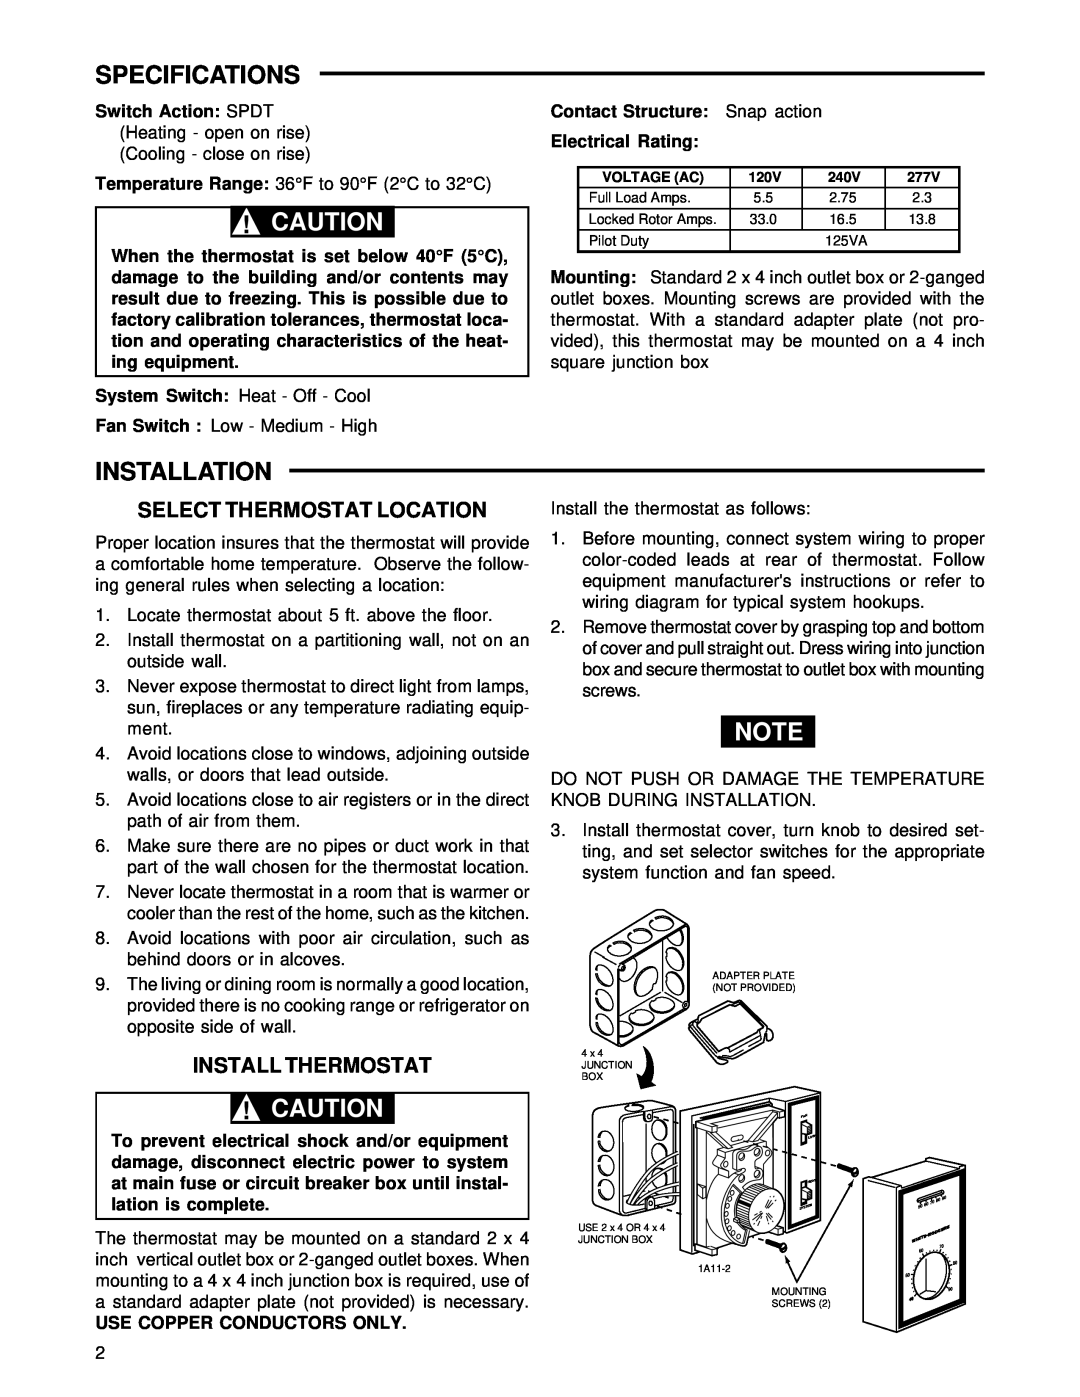 Emerson 1A11-2 installation instructions Specifications, Installation, Select Thermostat Location, Install Thermostat 